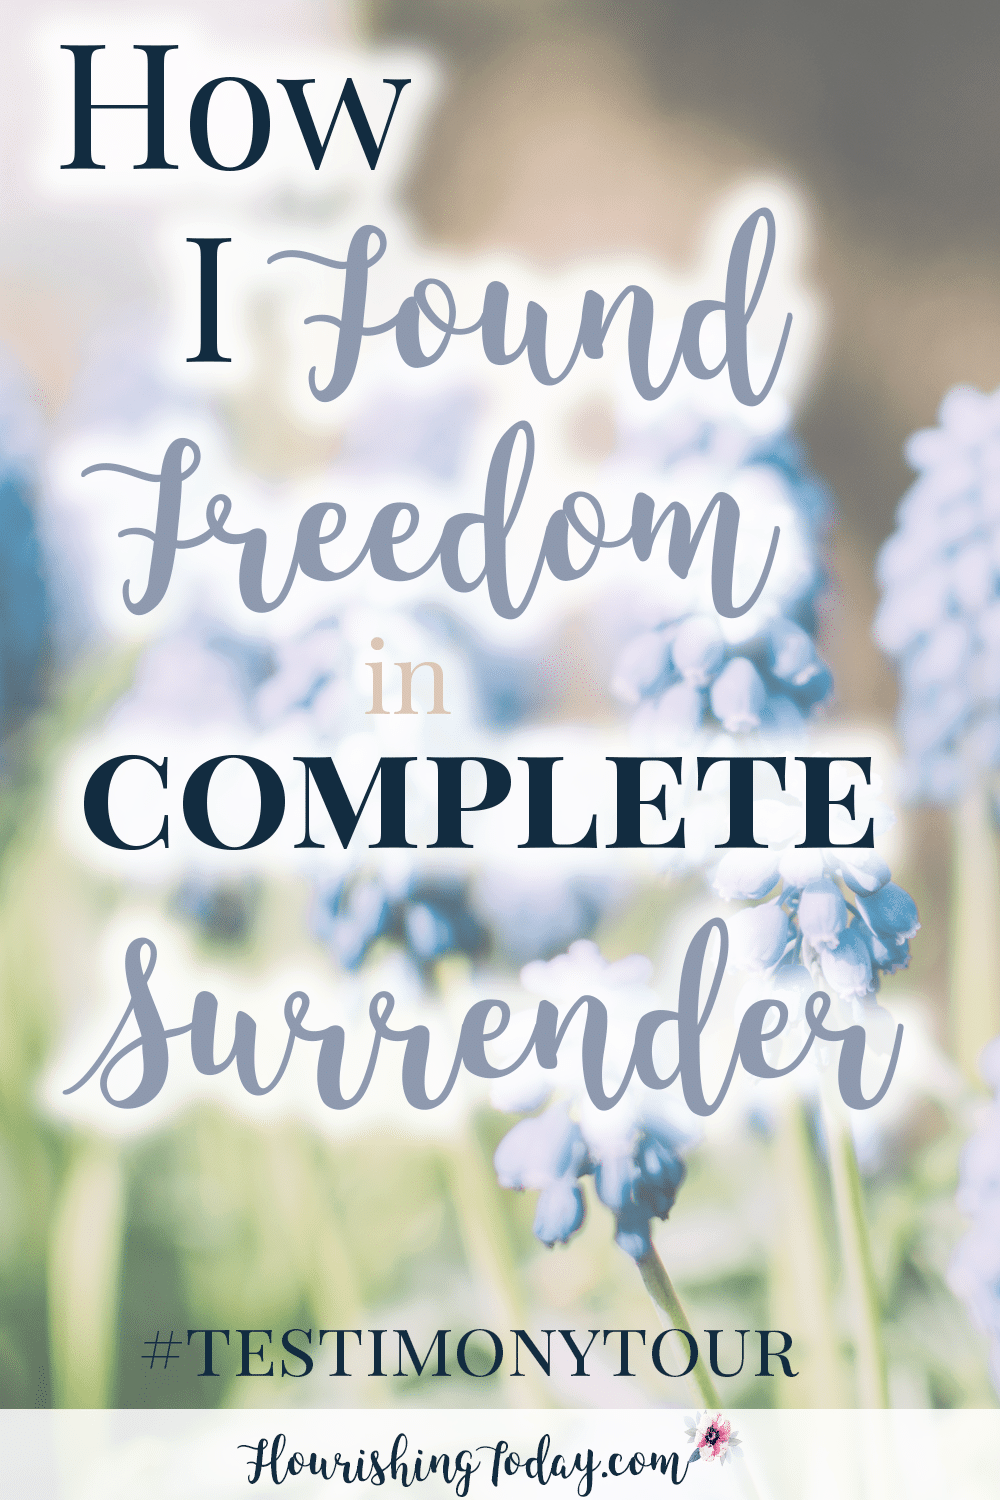 Has life taken the wind out of your sails? I can relate. But I also know there is freedom in surrender to Christ. Have you completely surrendered to Him?